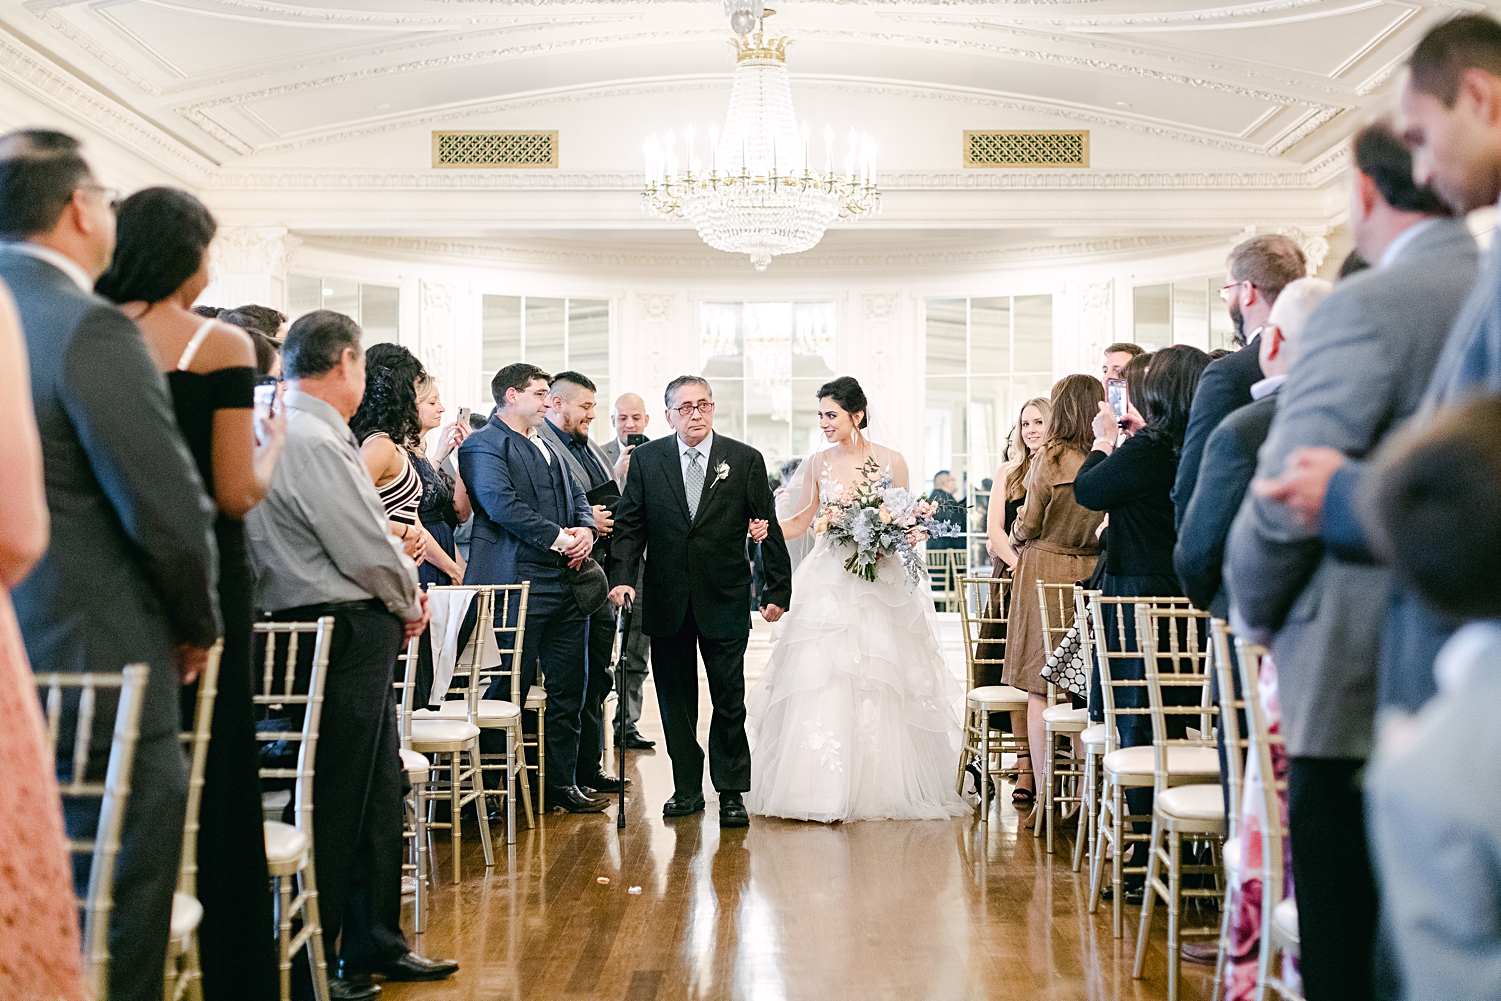 Indoor wedding ceremony bride and father walking down aisle with bouquet